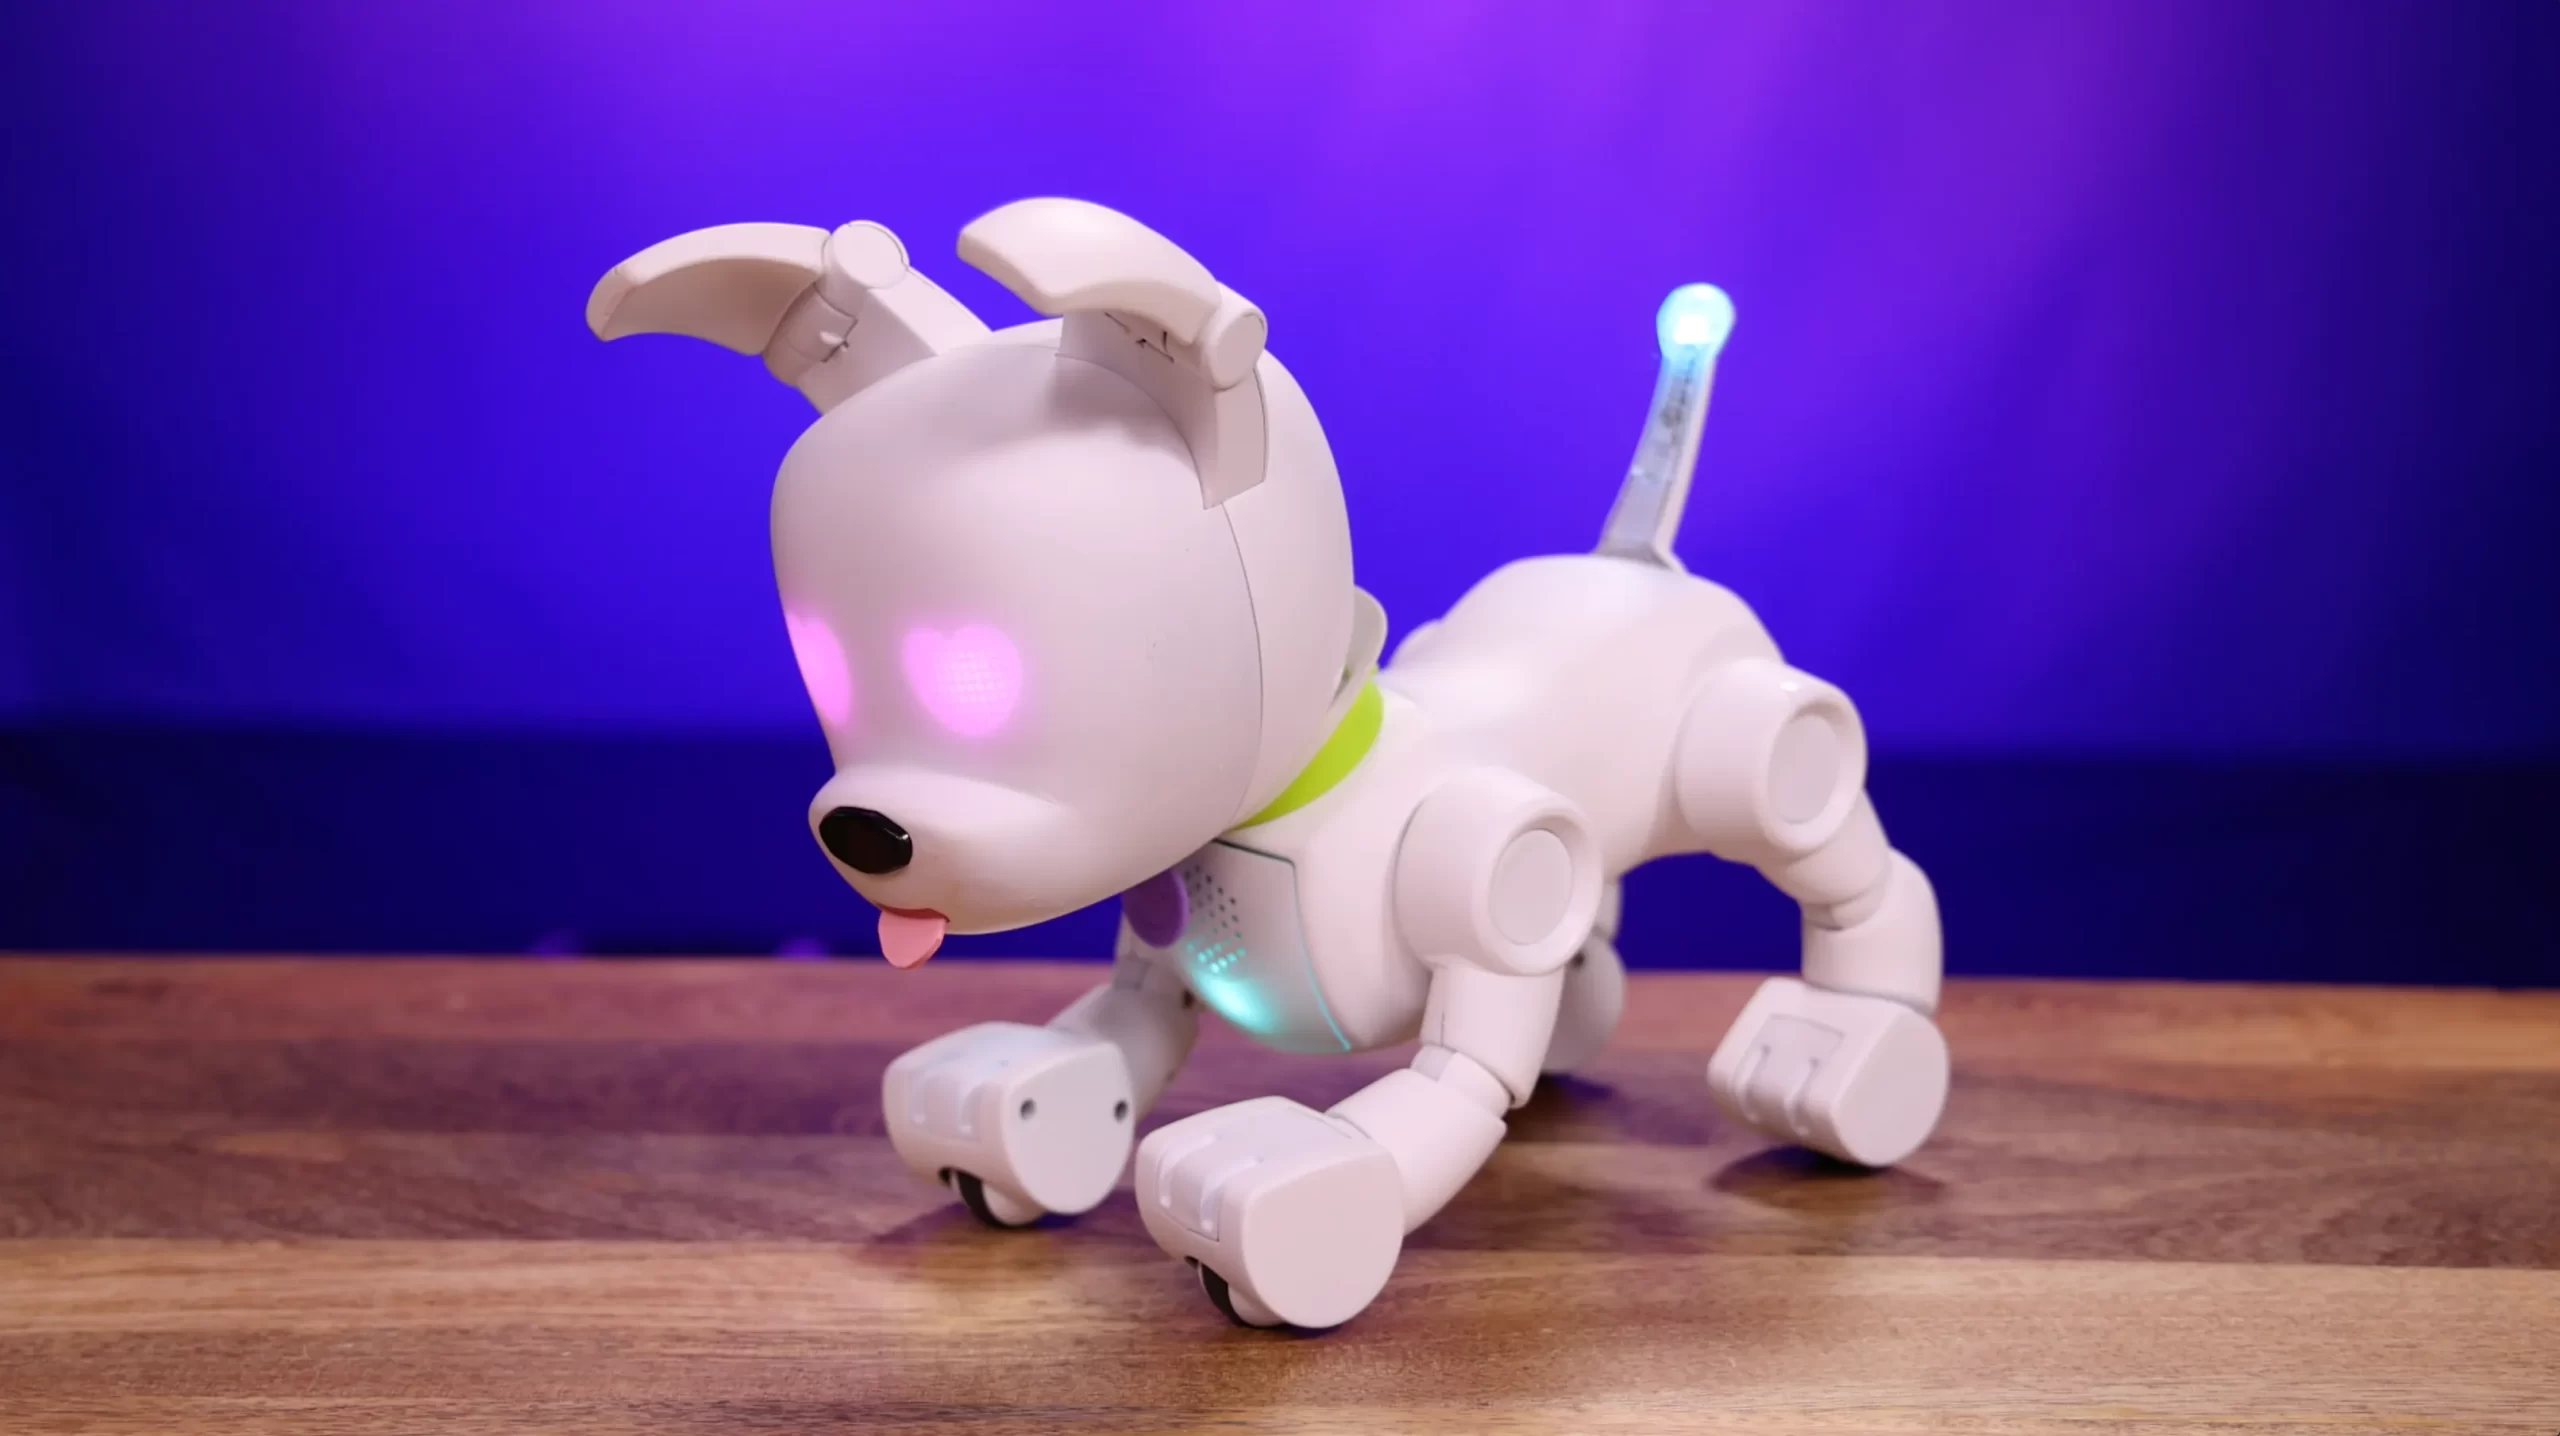 %name The Top Holiday Gift This Year Is A Robot Pet